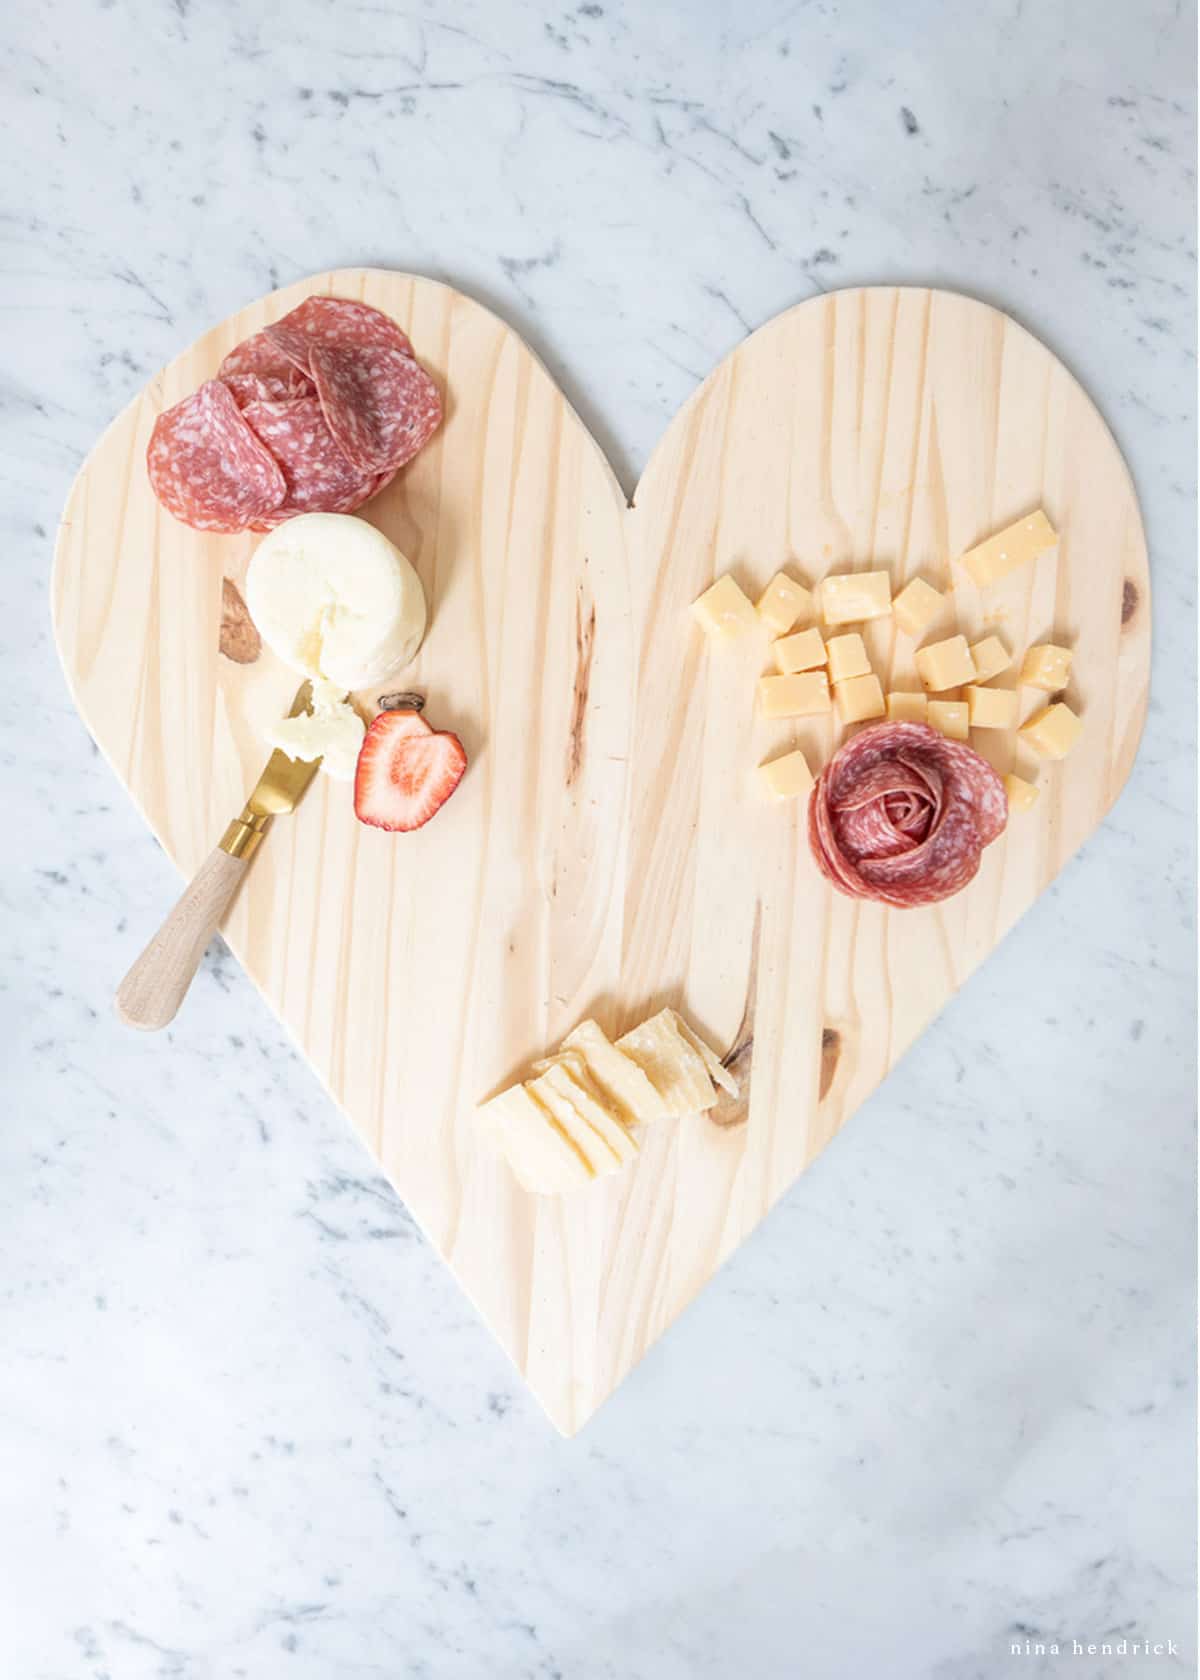 Adding salami roses to a cheese board